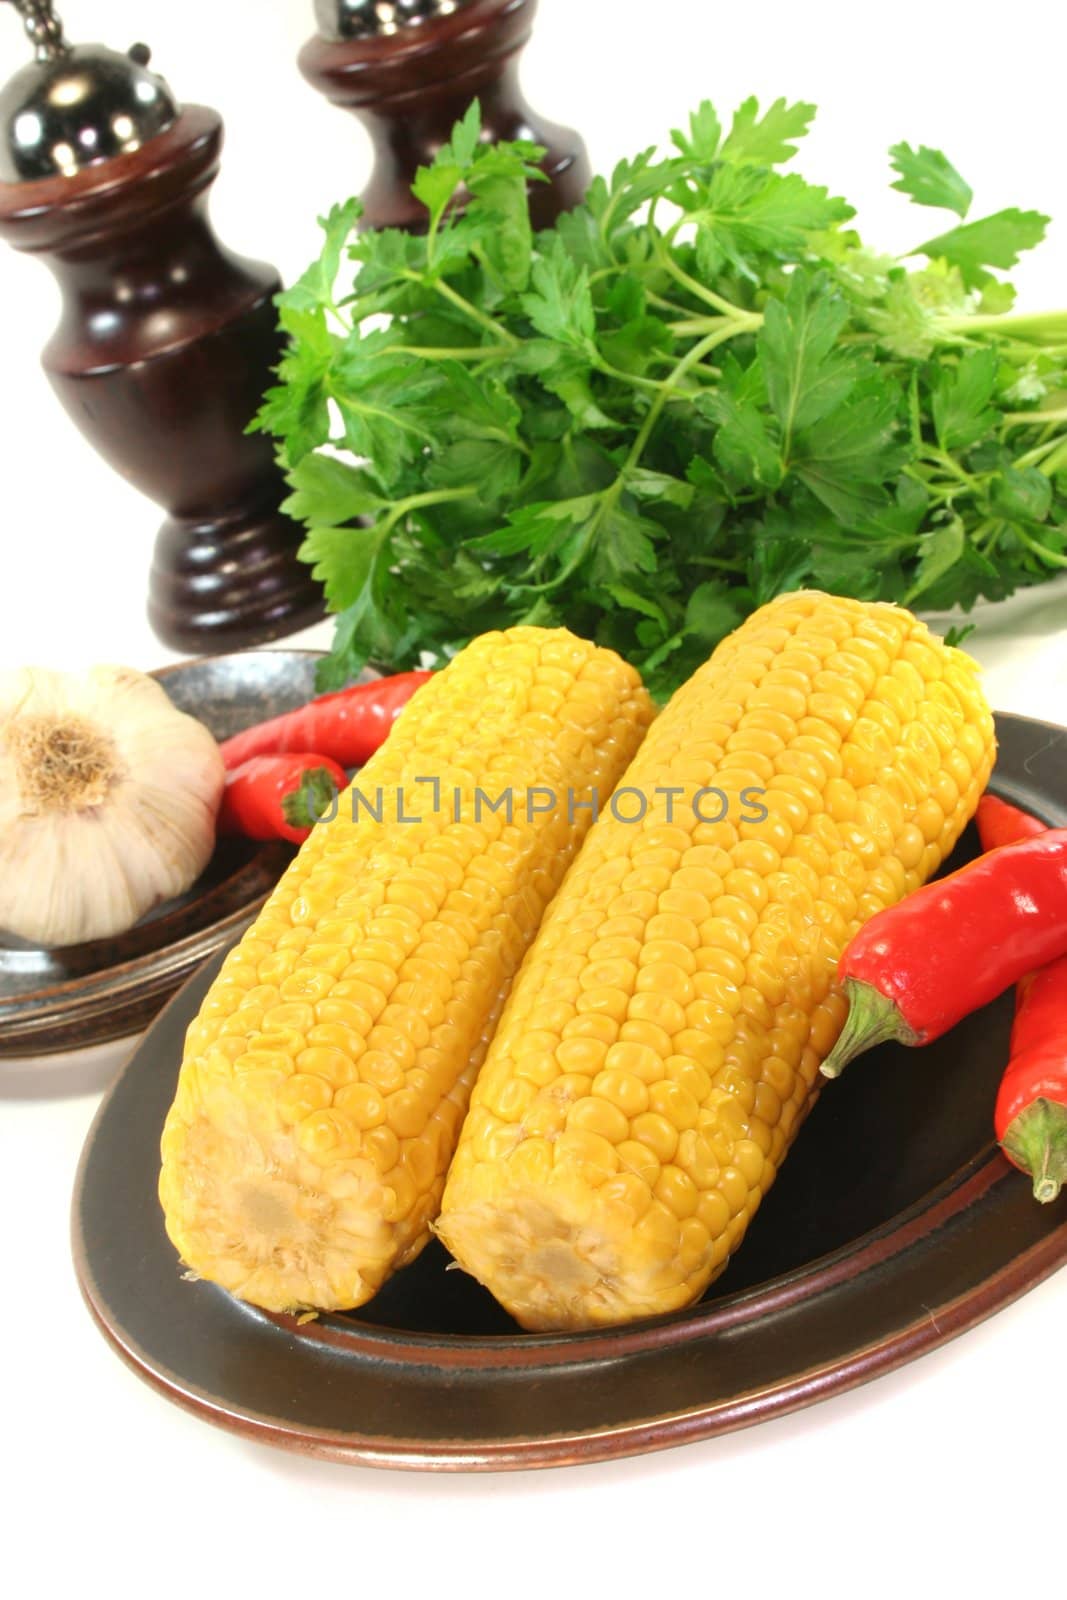 Corn on a plate with chili peppers, garlic and parsley